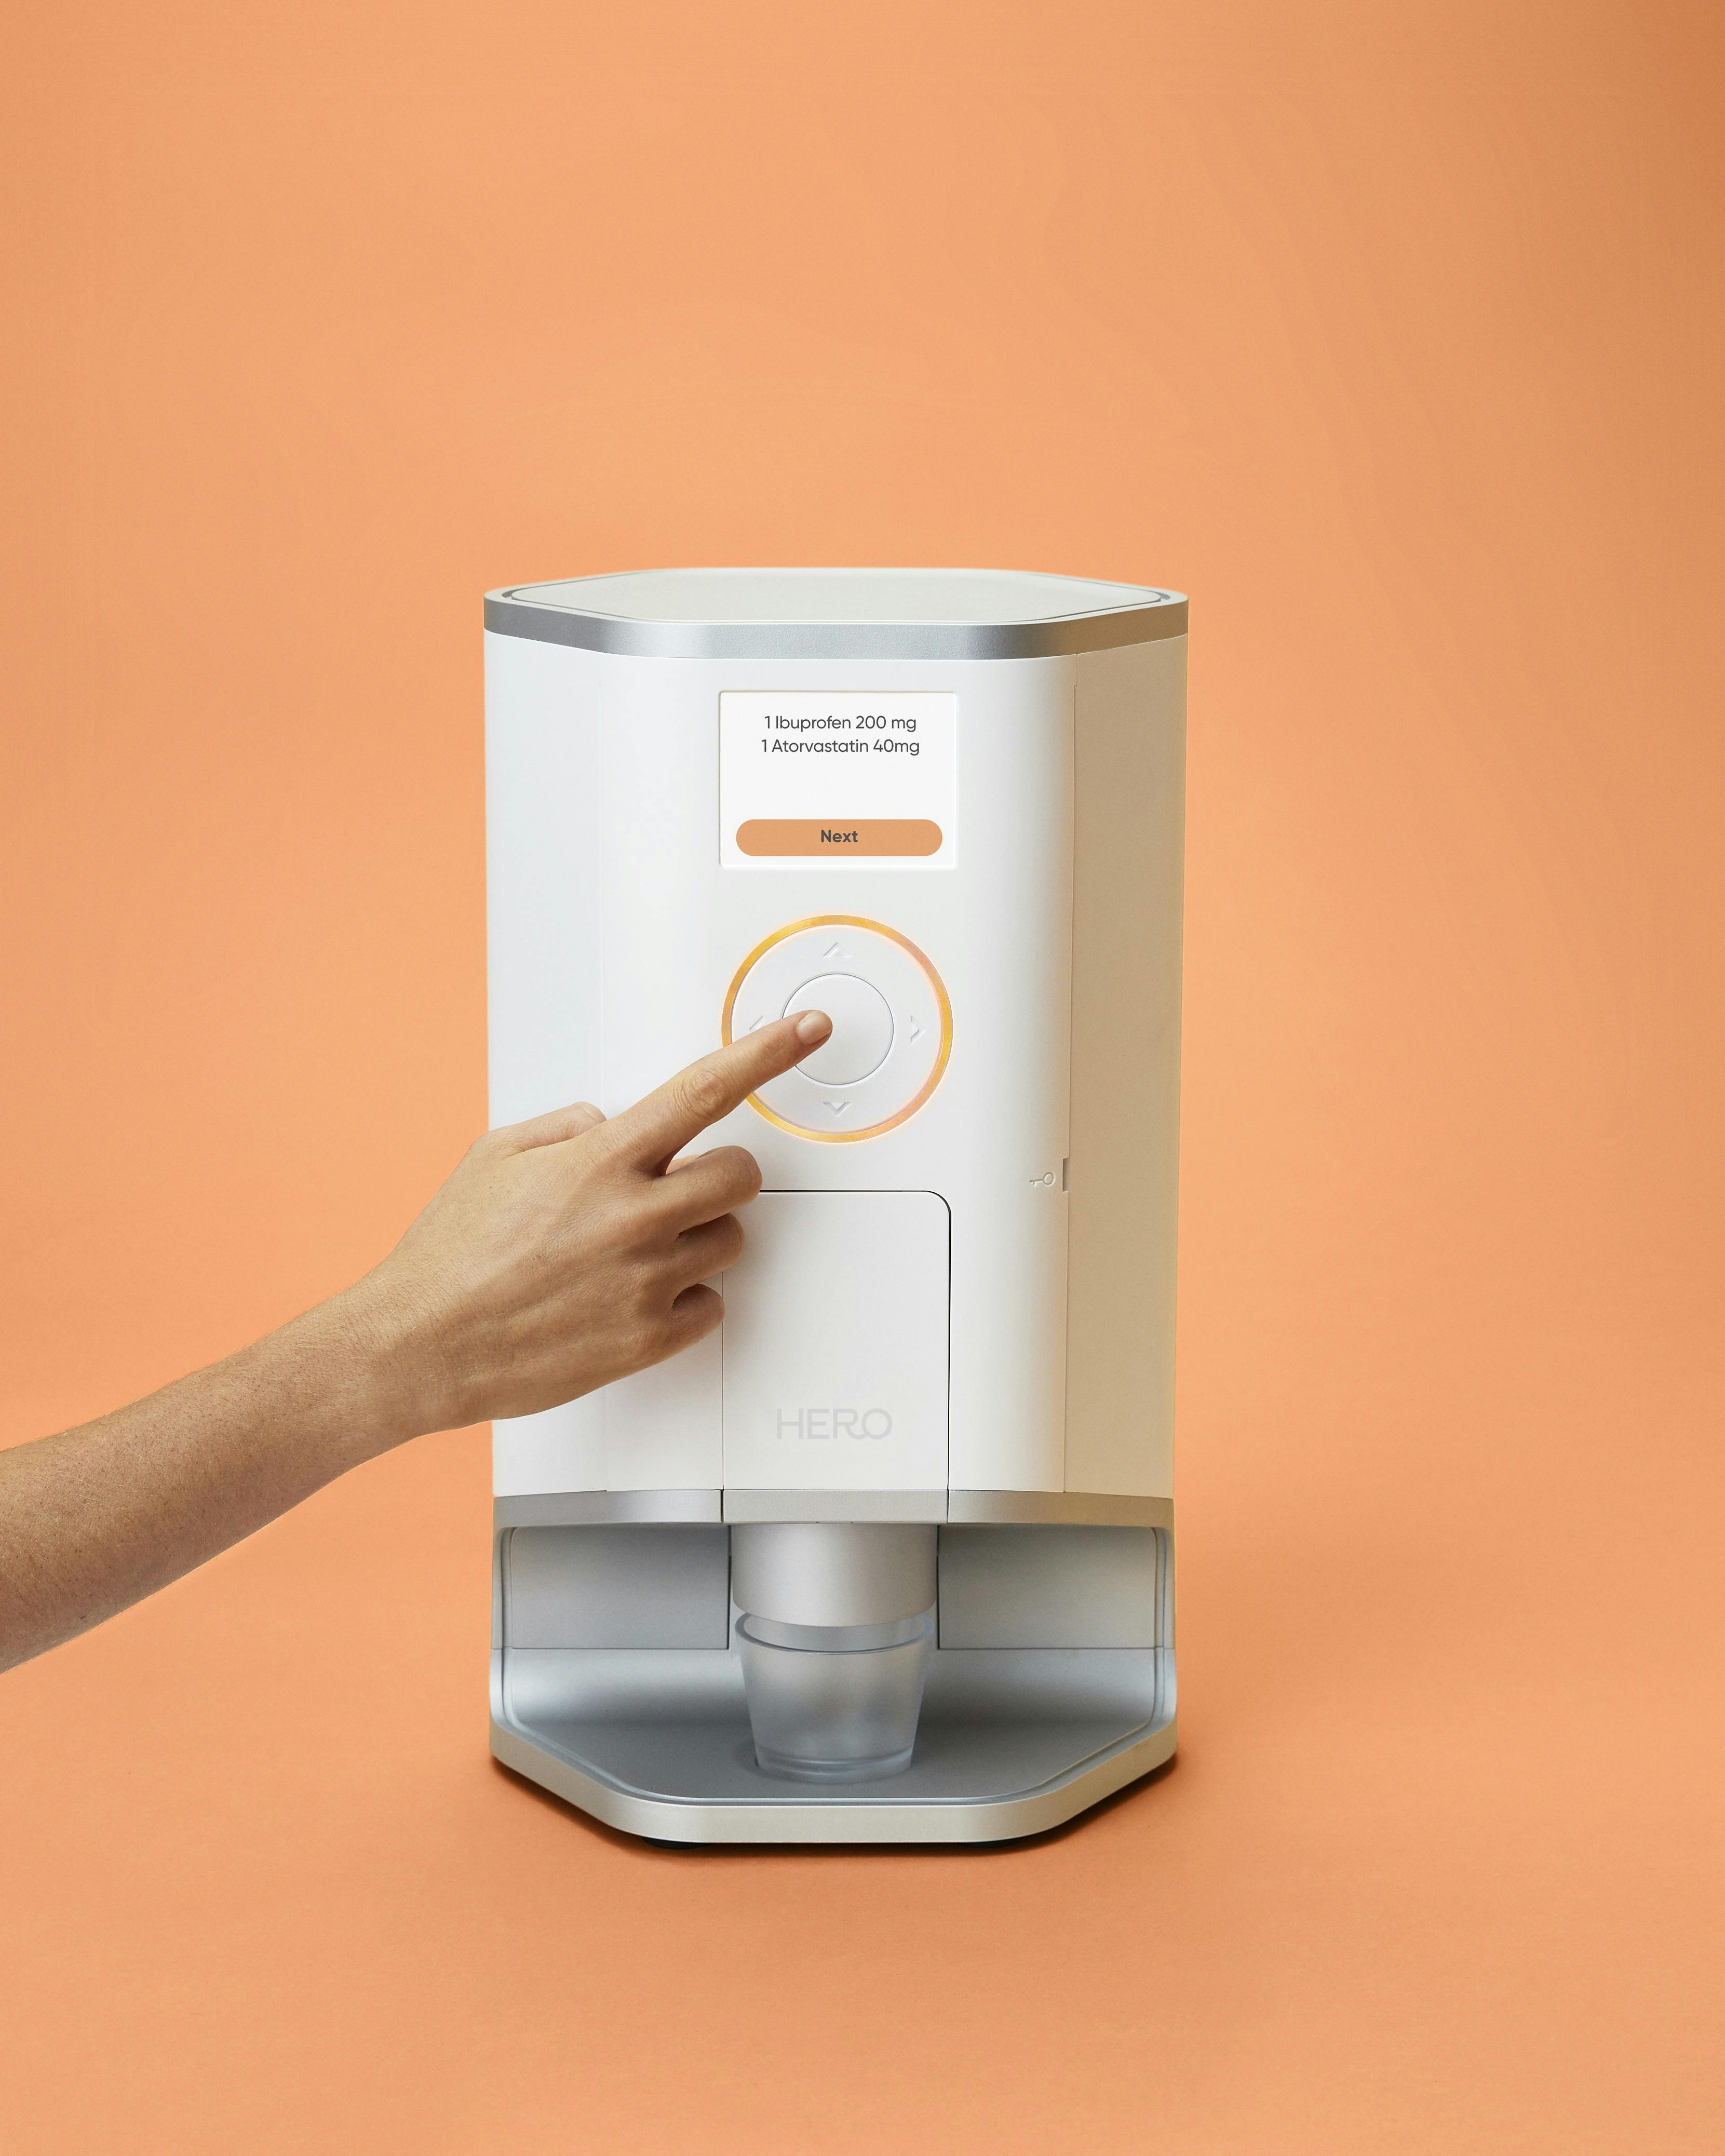 What are the benefits of using an automatic medication dispenser?